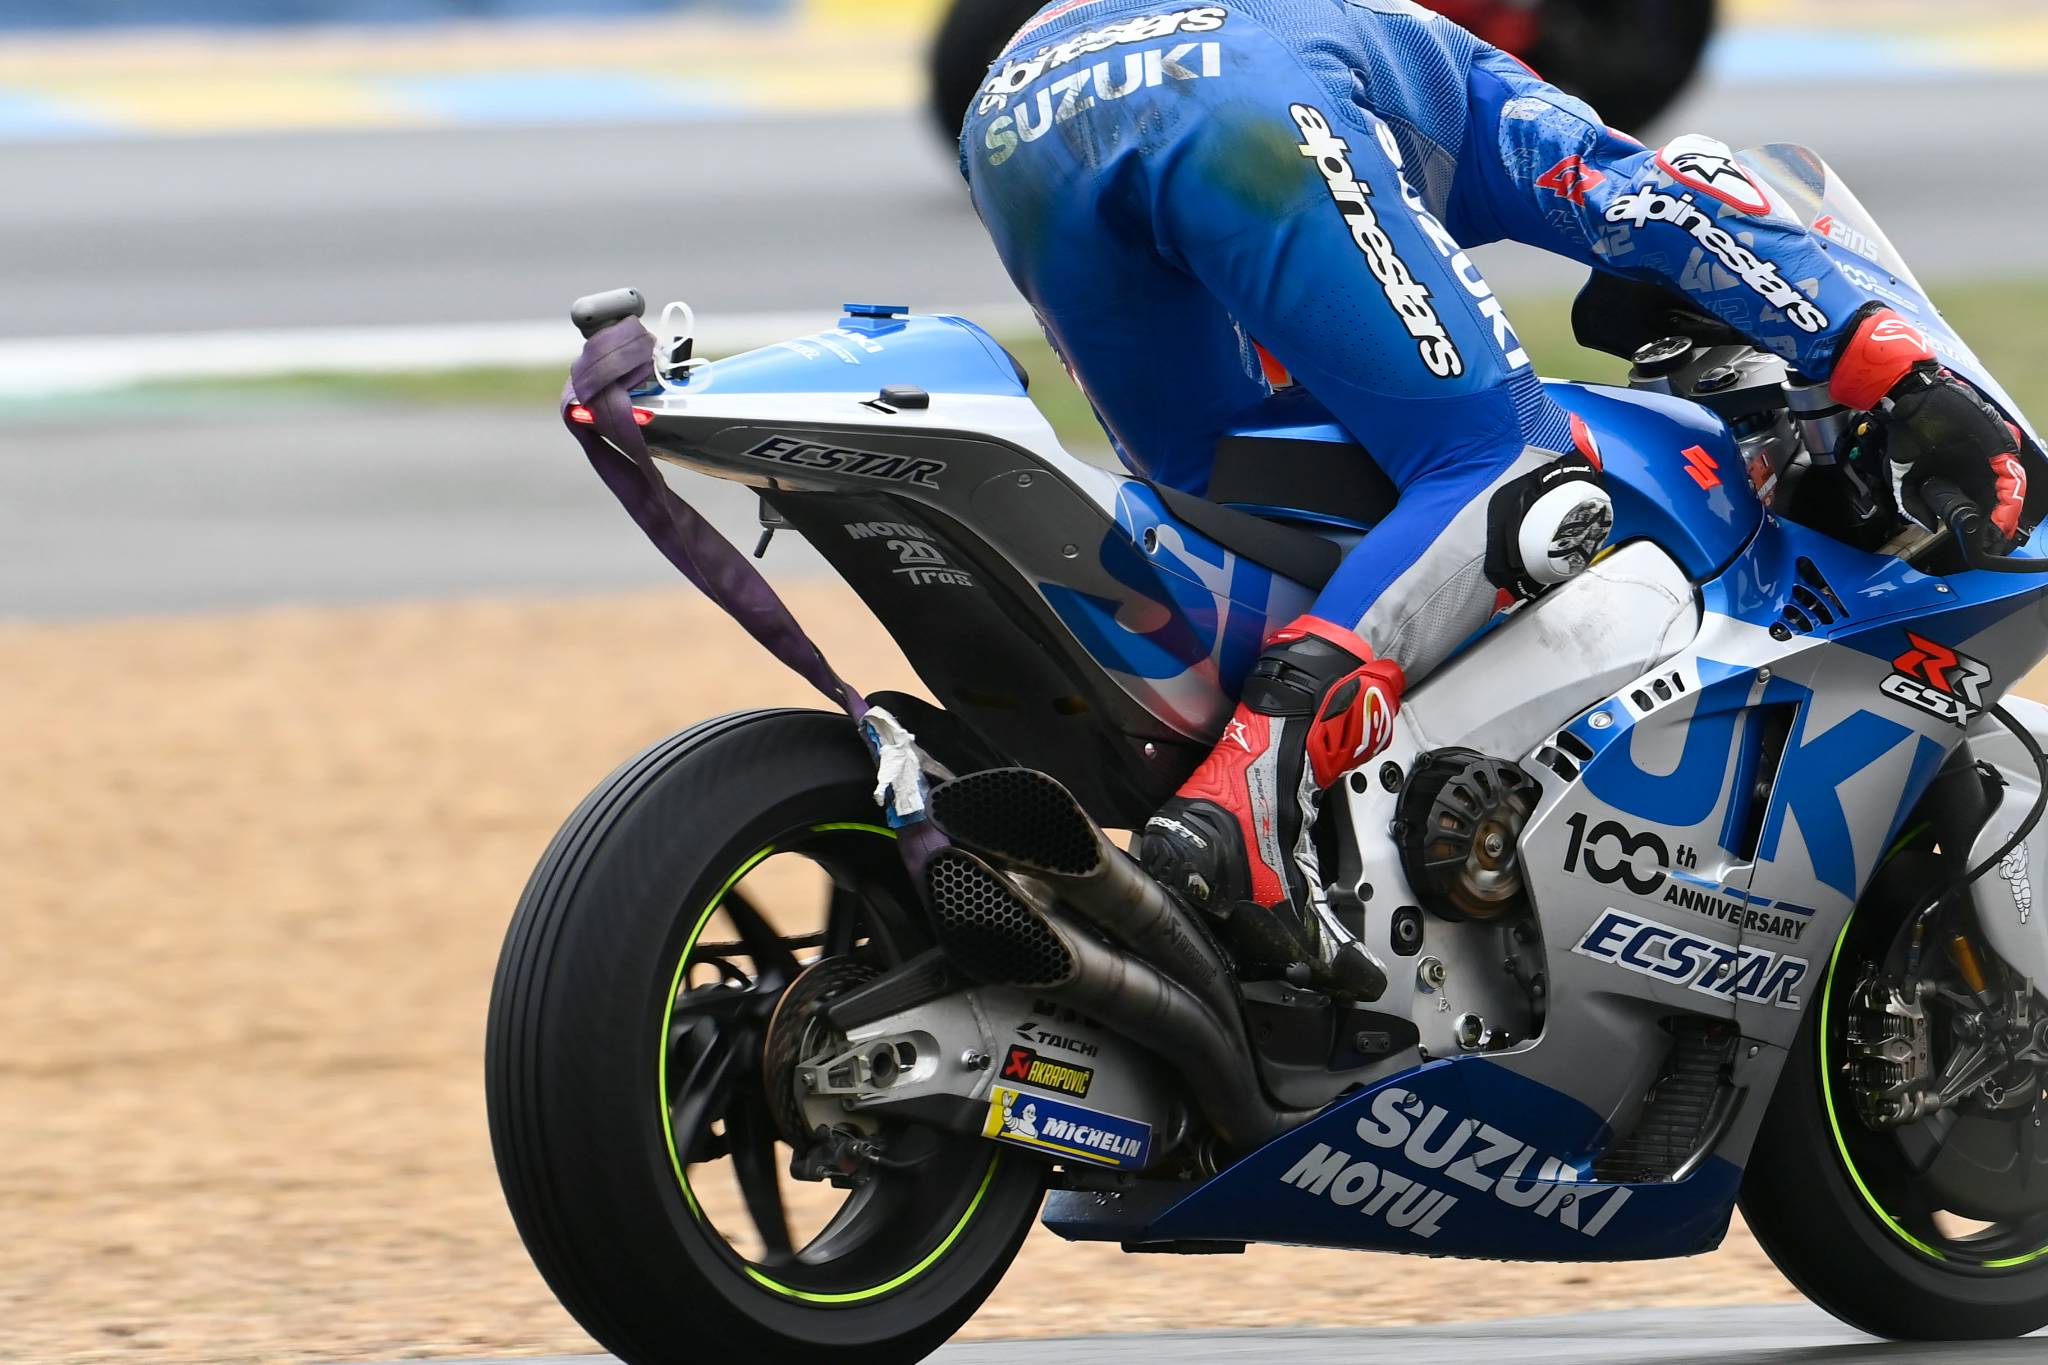 Alex Rins realising there is a strap attached to his bike, French MotoGP race. 11 October 2020